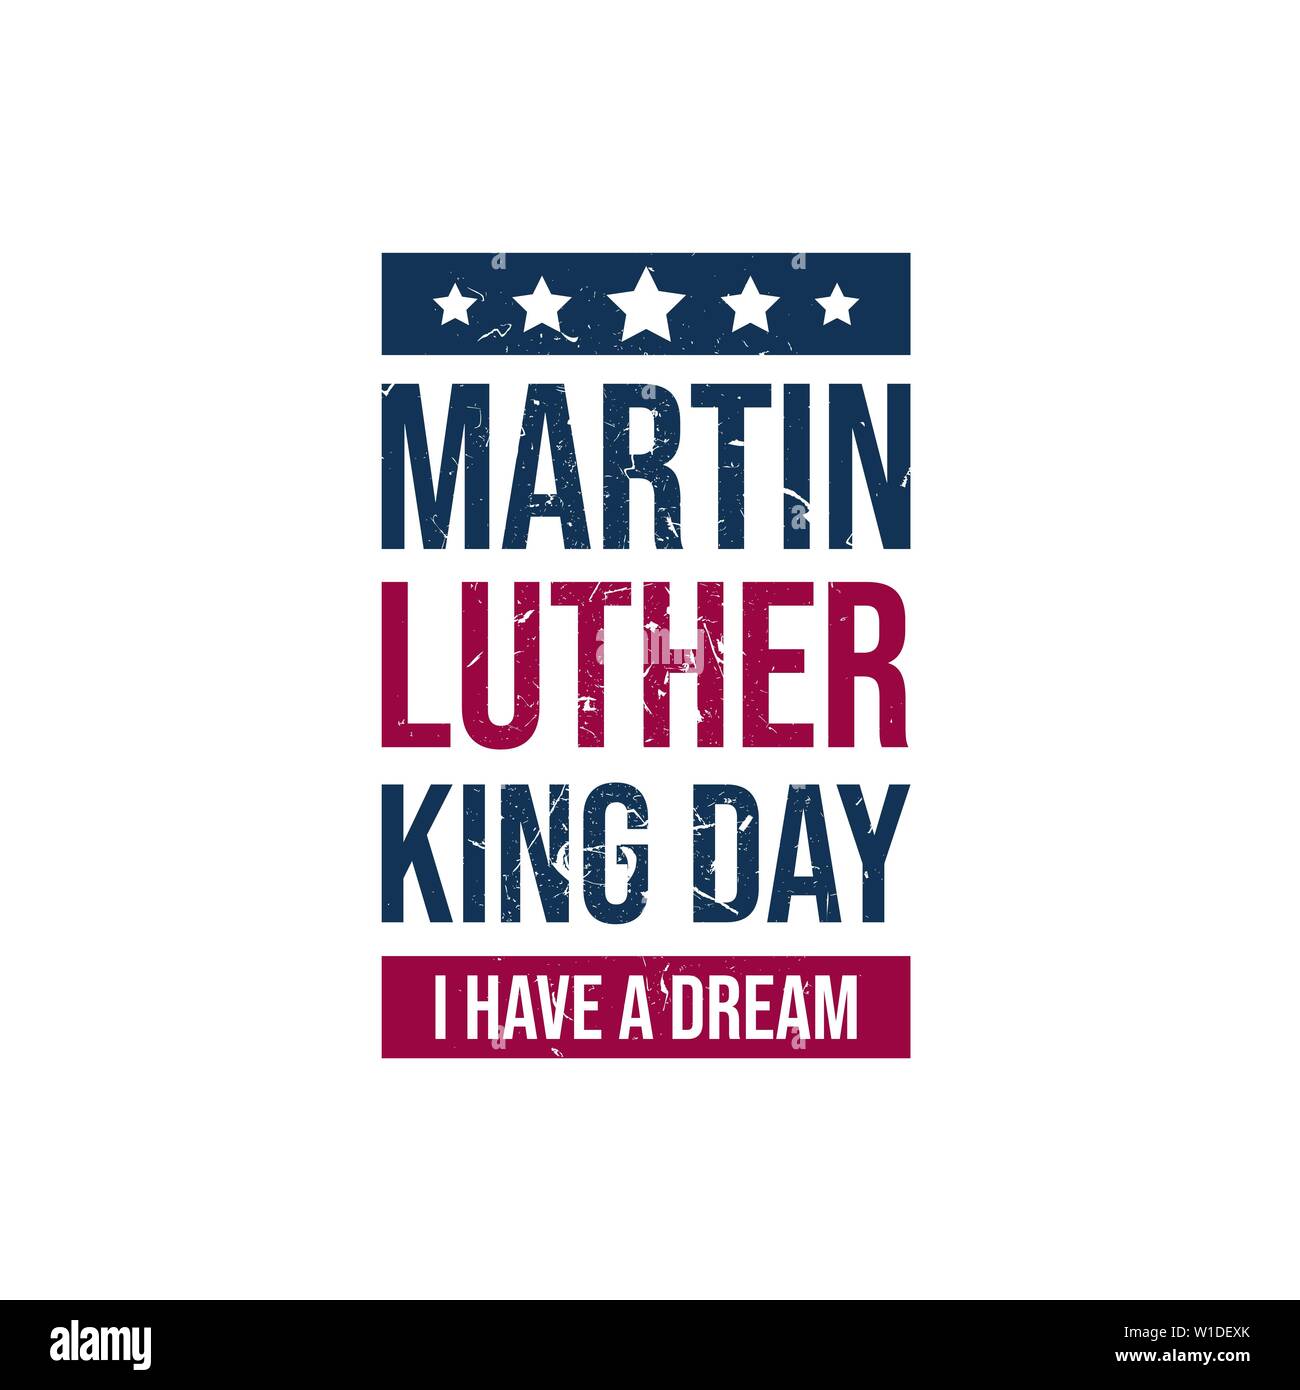 Martin luther king jr day vector image Stock Vector